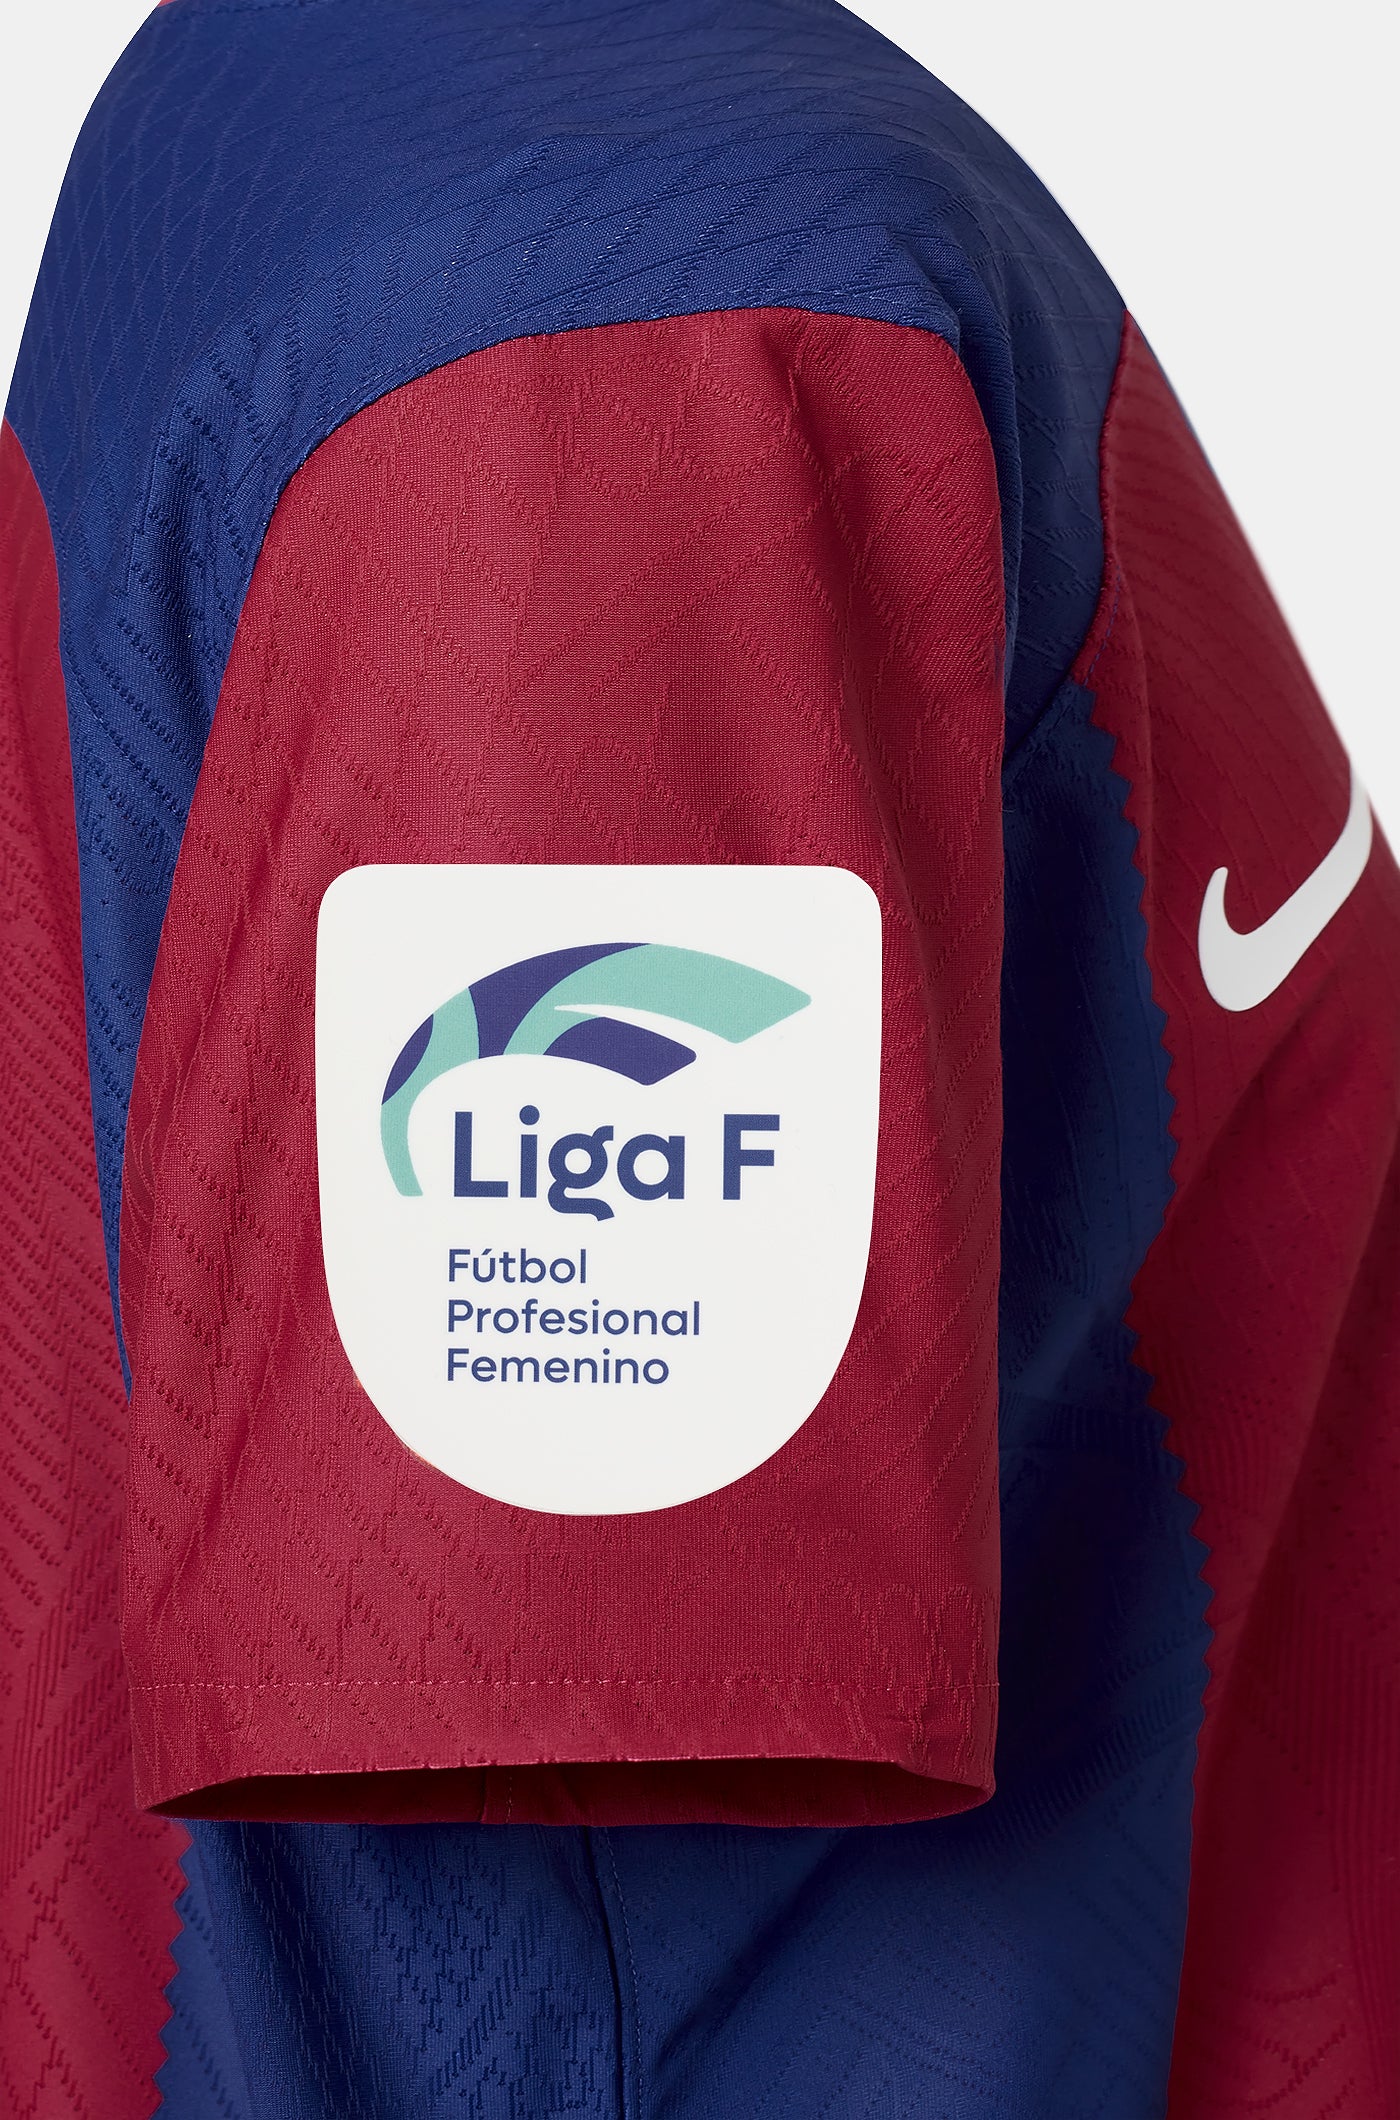 SIGNED | Limited Edition FC BARCELONA x Karol G 23/24 women's home jersey signed by the starting line-ups of the men's El Clásico match (21/04) and the women's match vs. Villarreal (13/04)